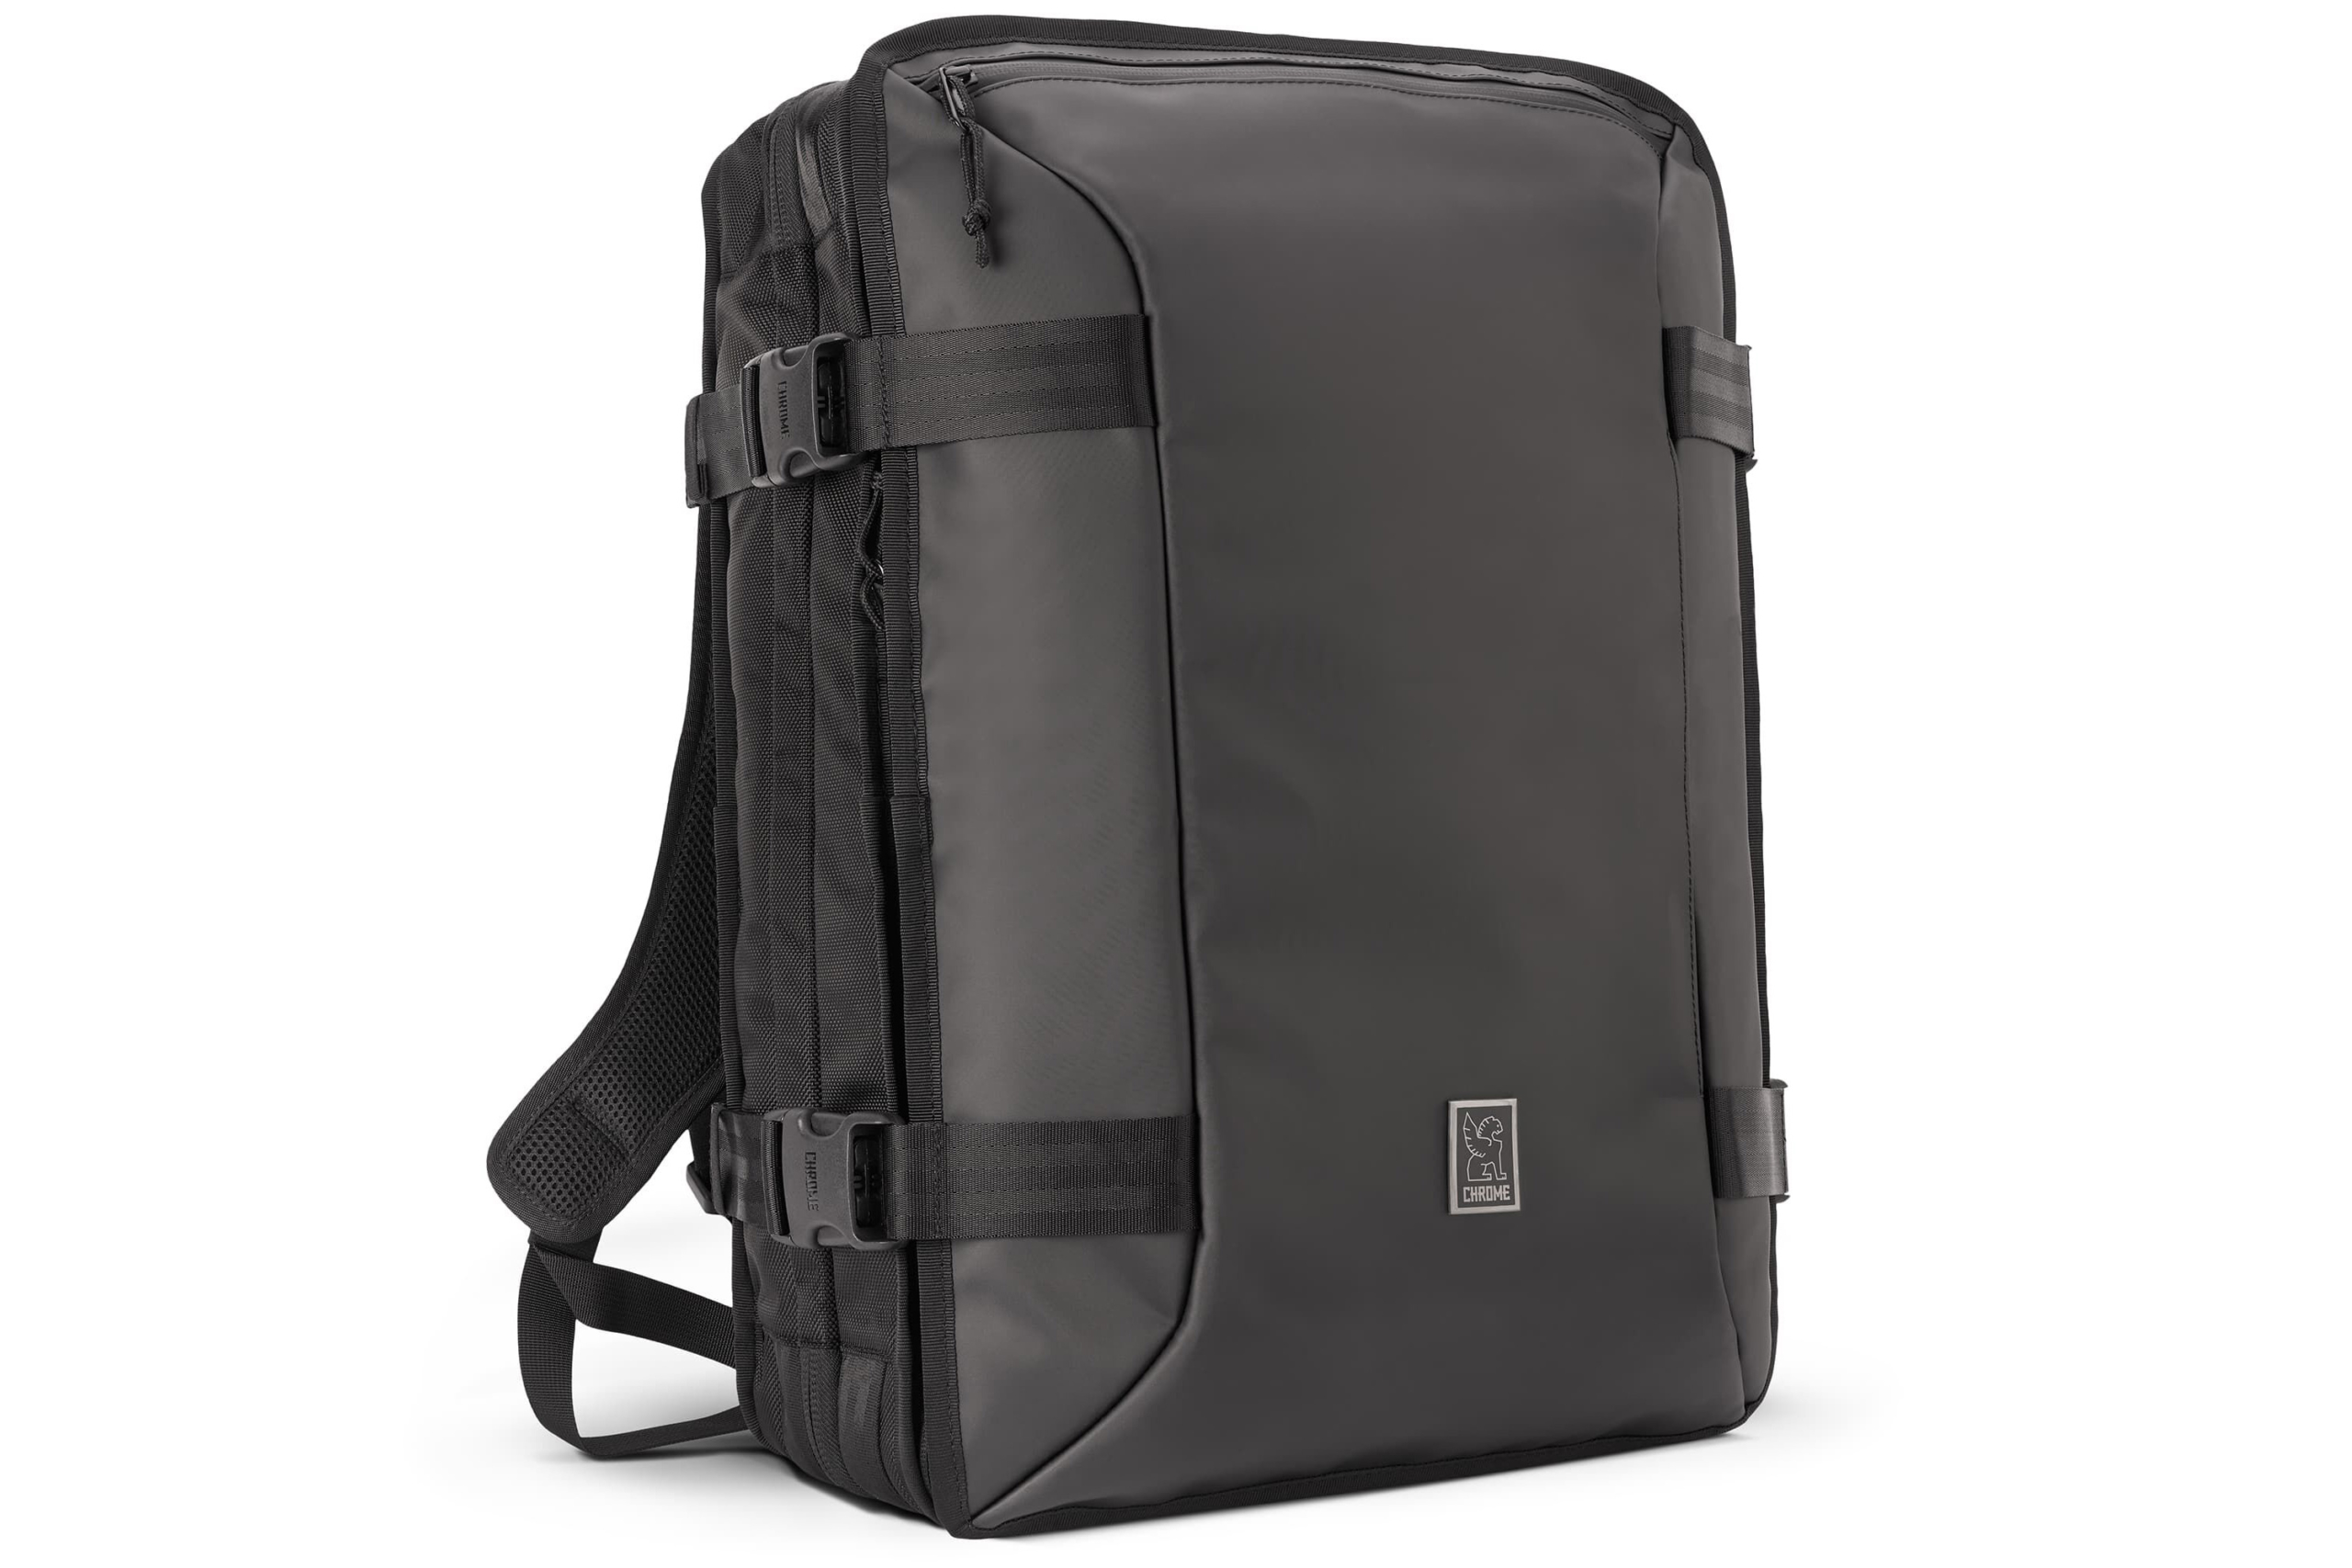 15 Best Travel Backpacks To Take With You on the Road - The Manual